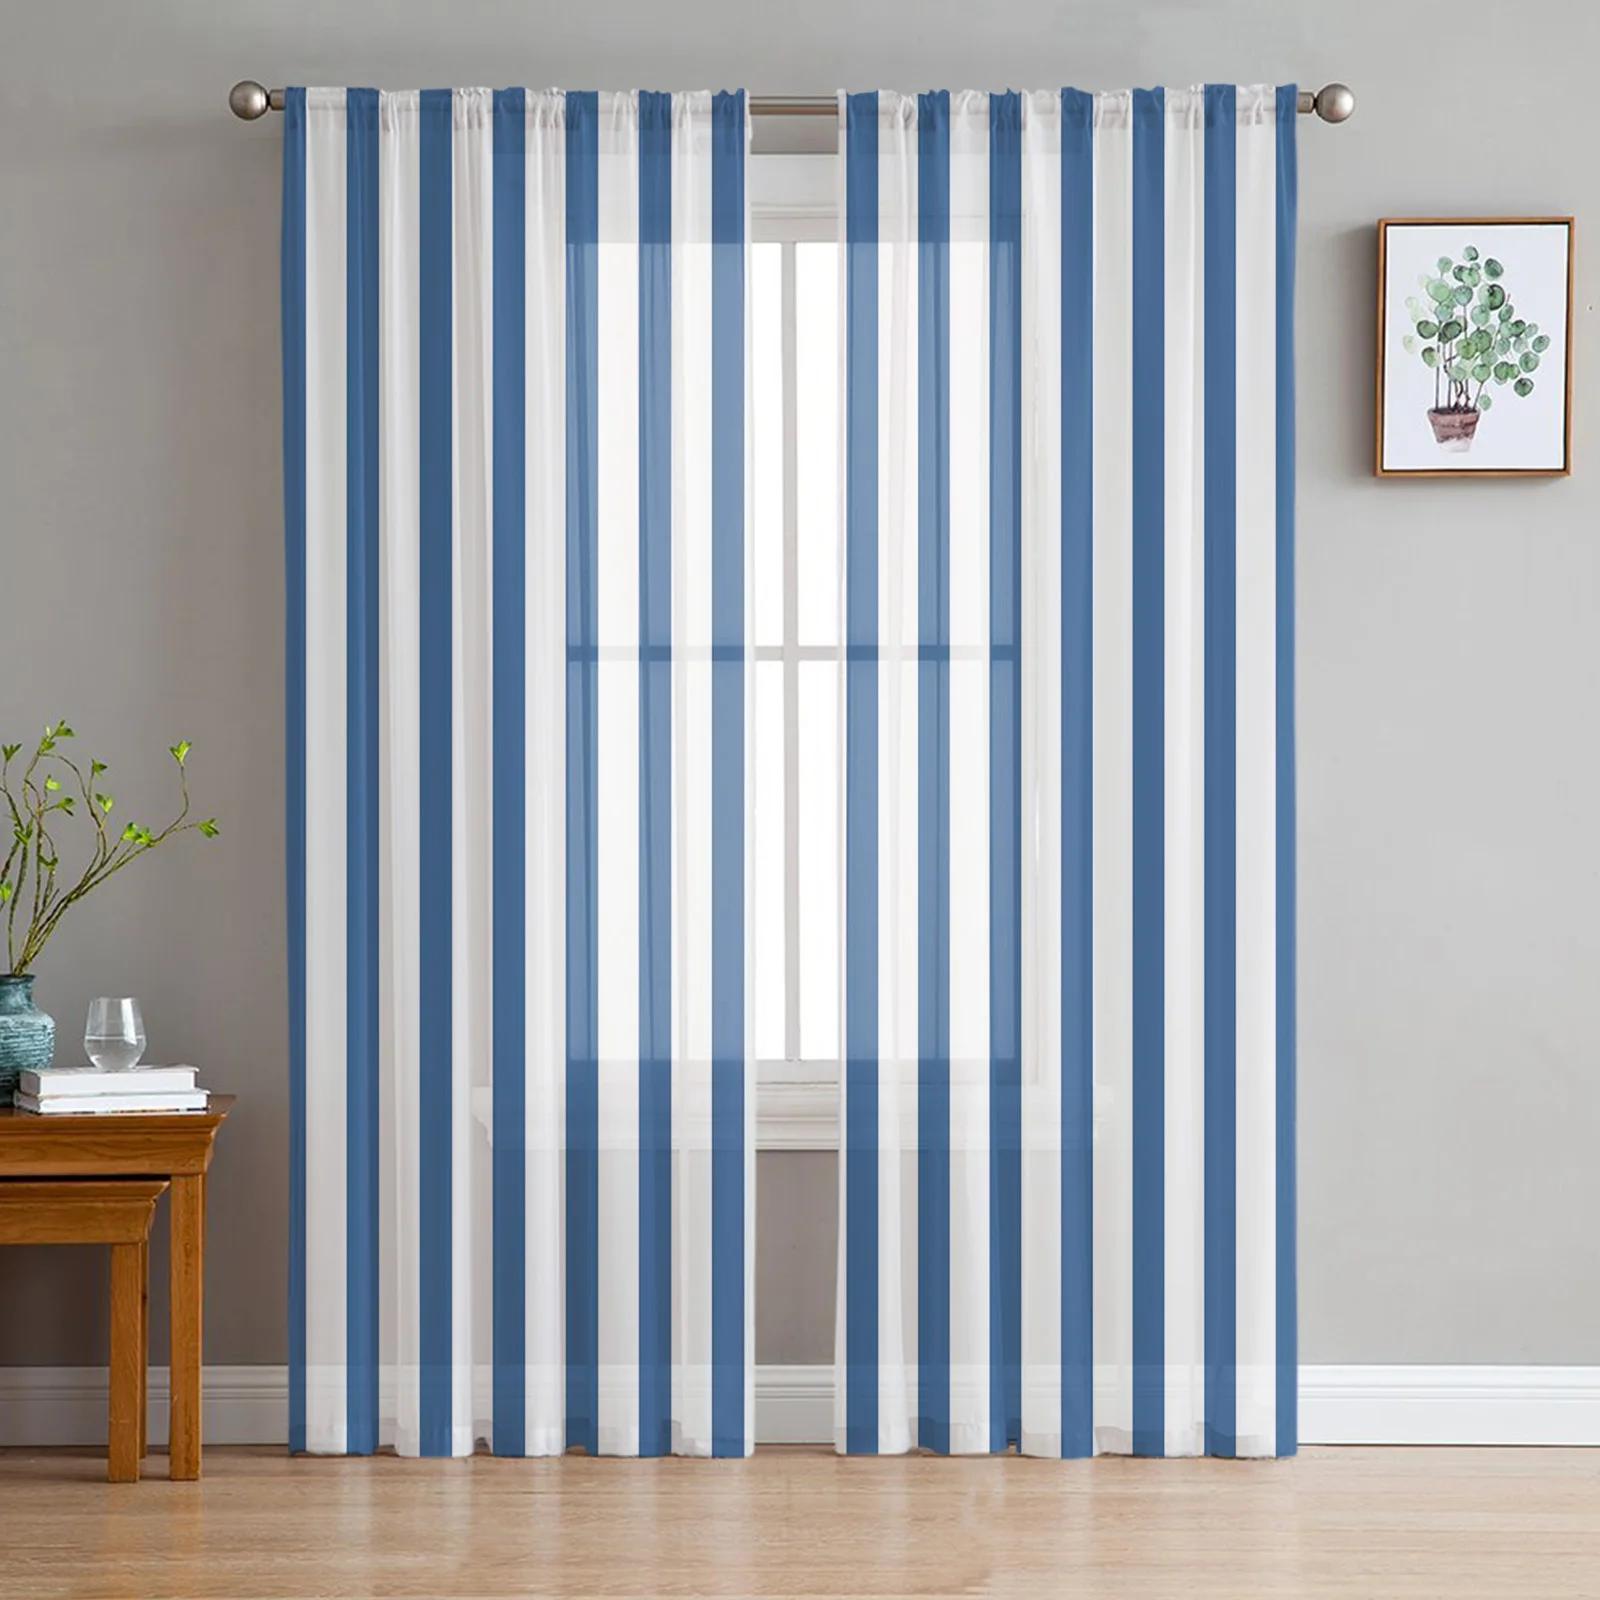 

White Blue Stripes Geometric Sheer Curtains Window Treatment for Kitchen Living Room Bedroom Decoration Modern Tulle Curtains